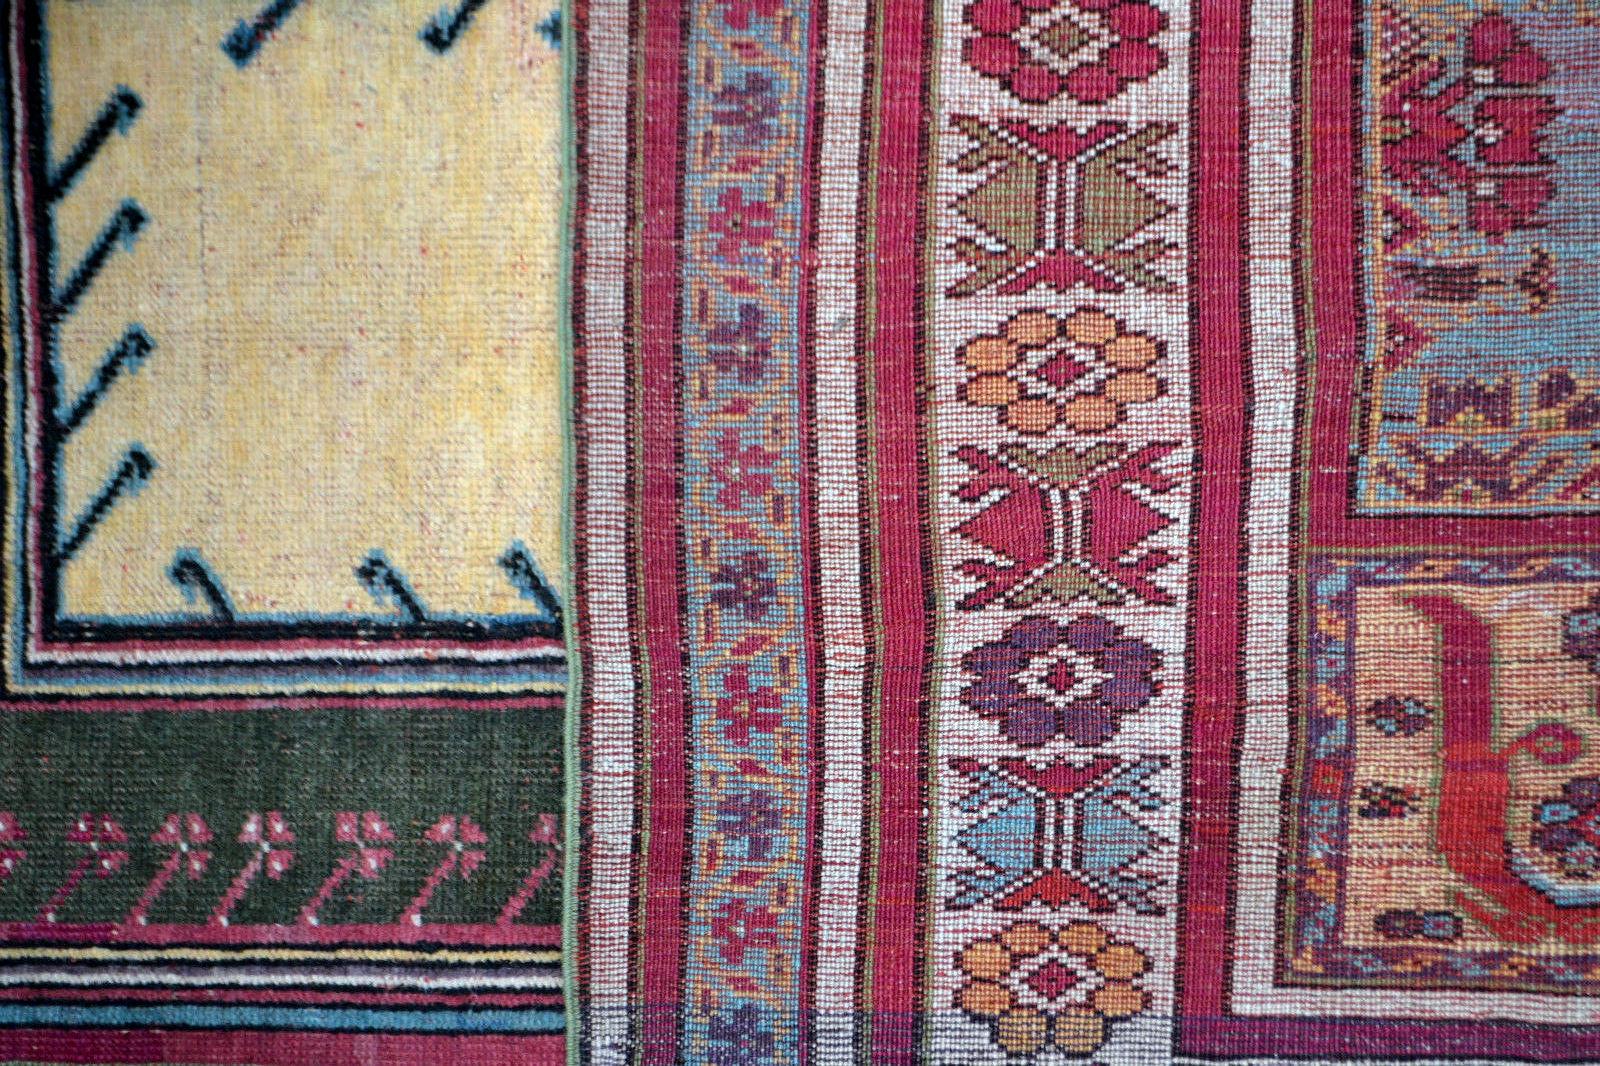 Handmade antique Turkish Kersheir rug from the end of 19th century. It is in original good condition, made in colorful wool.

- Condition: Original good,

- circa 1880s,

- Size: 3.9' x 5.9' (120cm x 180cm),

- Material: Wool,

- Country